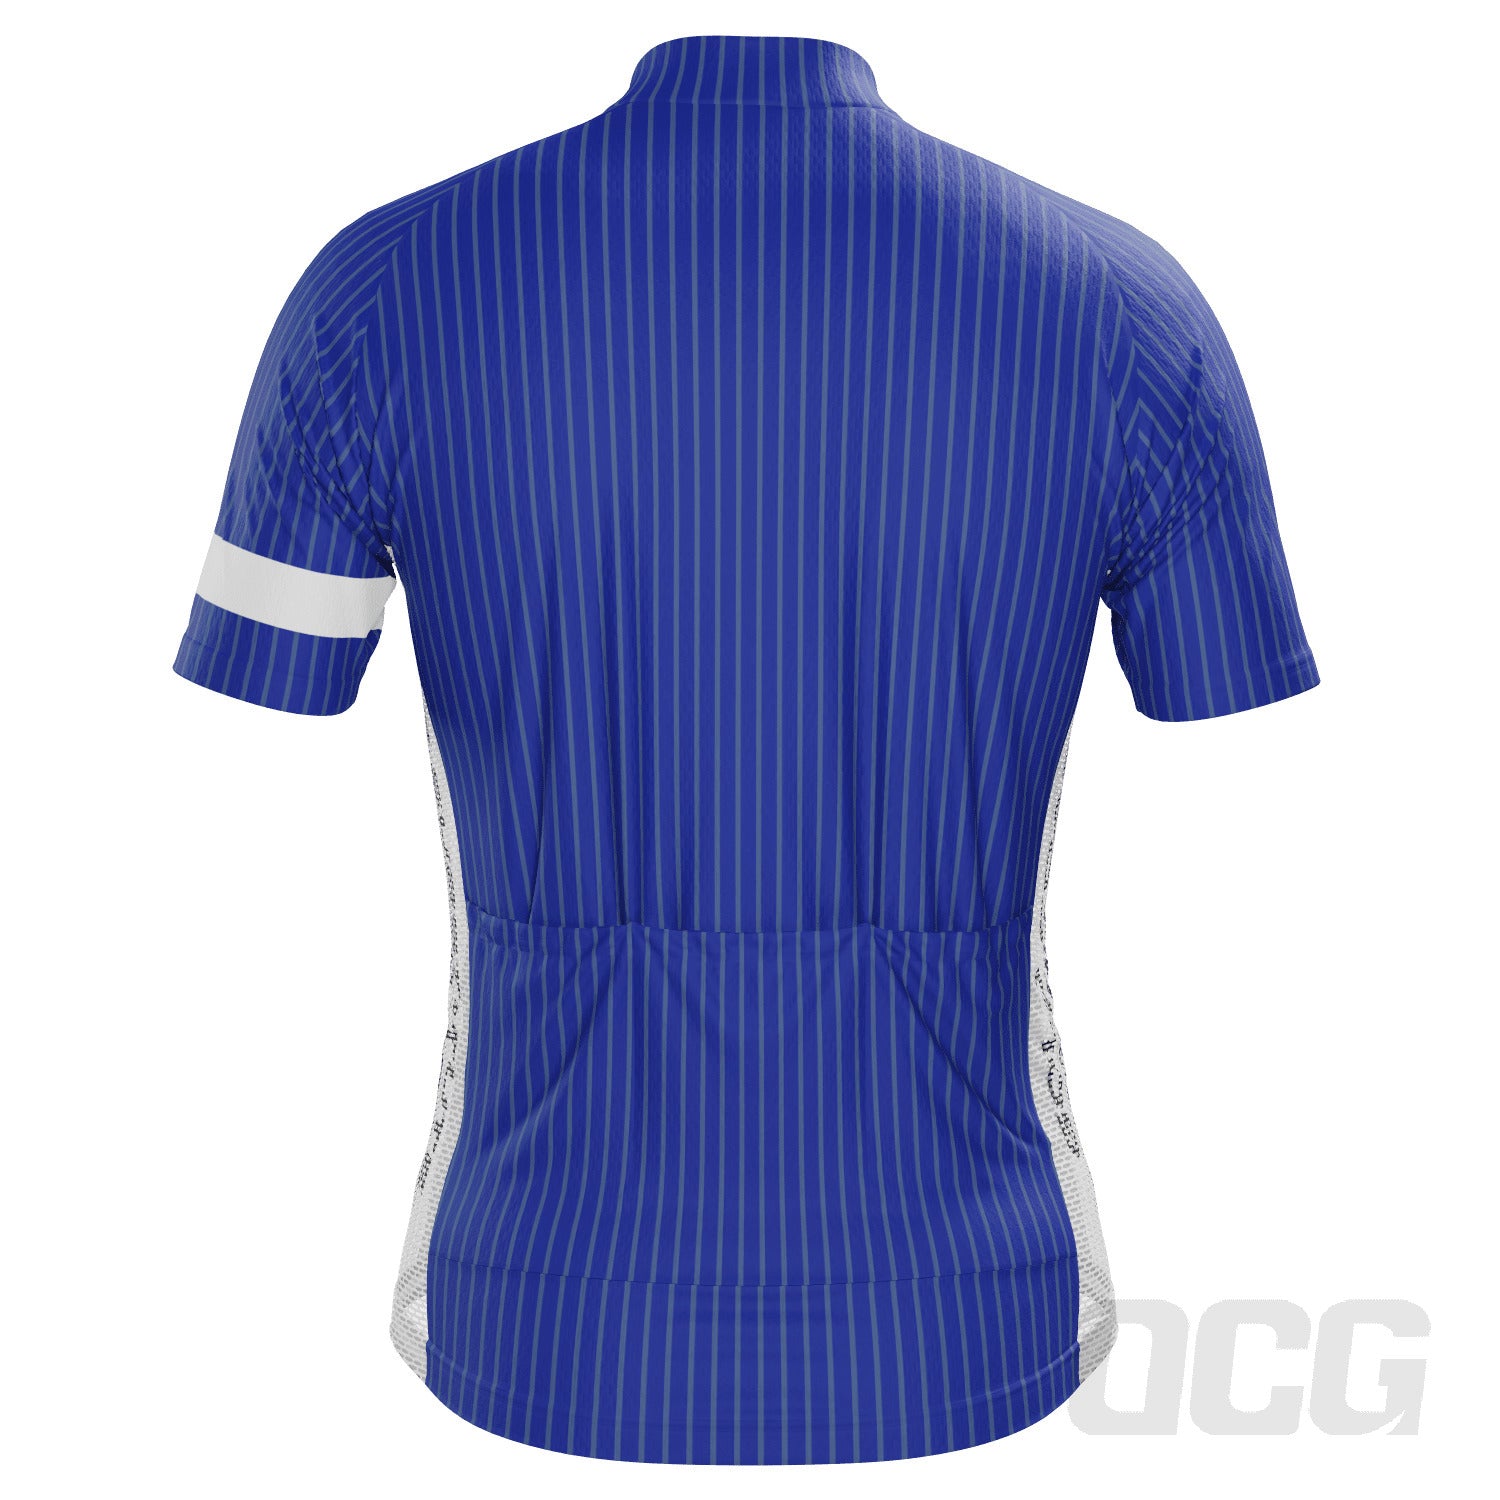 Men's Gold Coast Boating Centre - Blue Stripes Short Sleeve Cycling Jersey